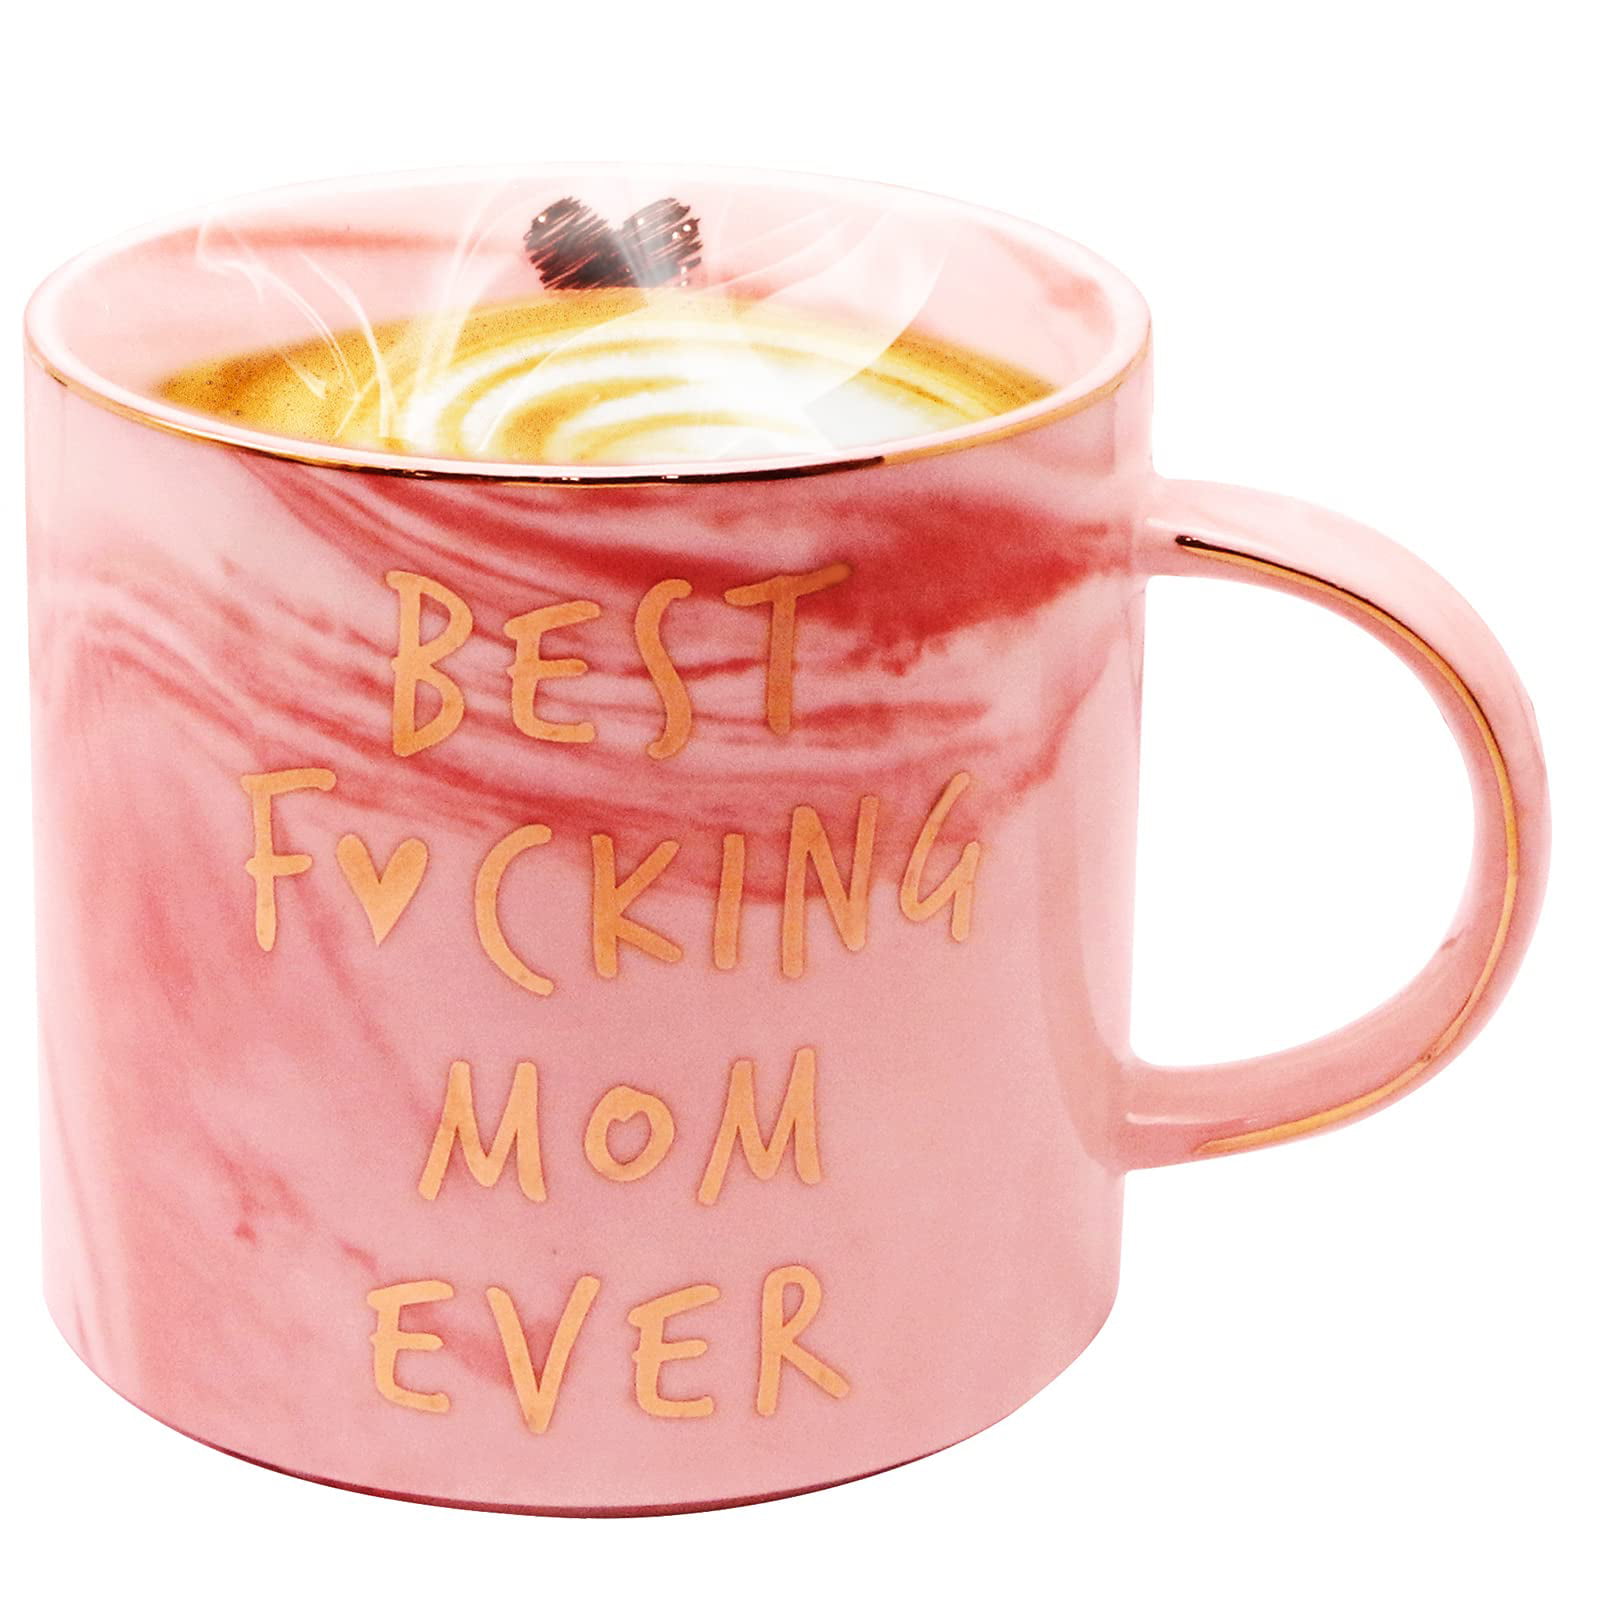 Careform Boy Mama Mug from Son Up to Son Down Mom Life Coffee Cup Gift for Her Coffee Lover Birthday Gift for Mother Mom of Boys, Mother's Day Gifts